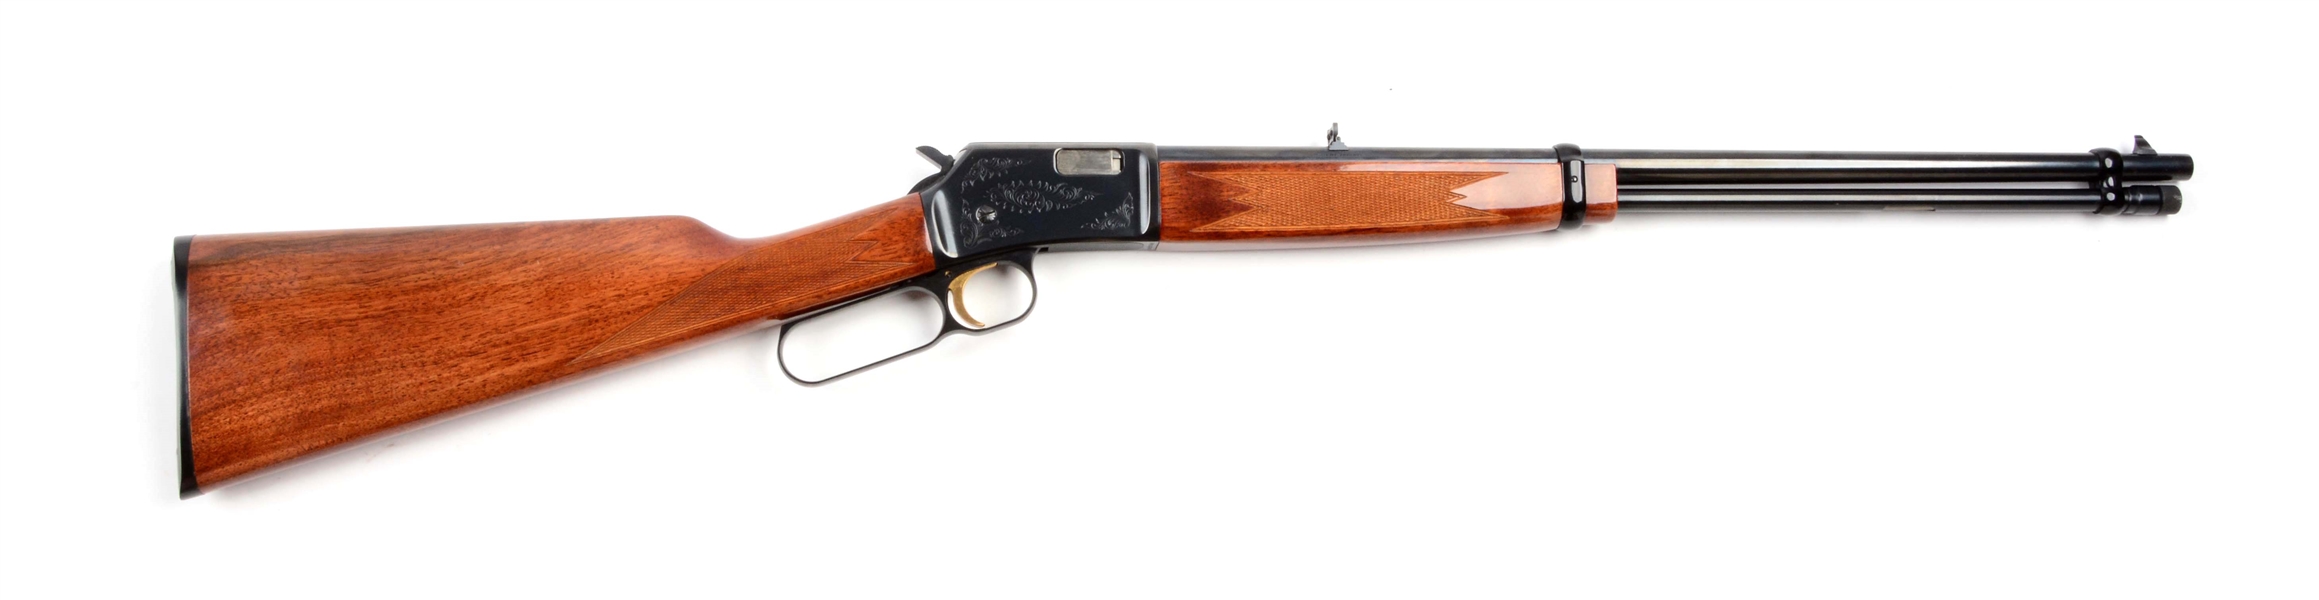 (M) MIB DELUXE GRADE BROWNING BL22 LEVER ACTION RIFLE.